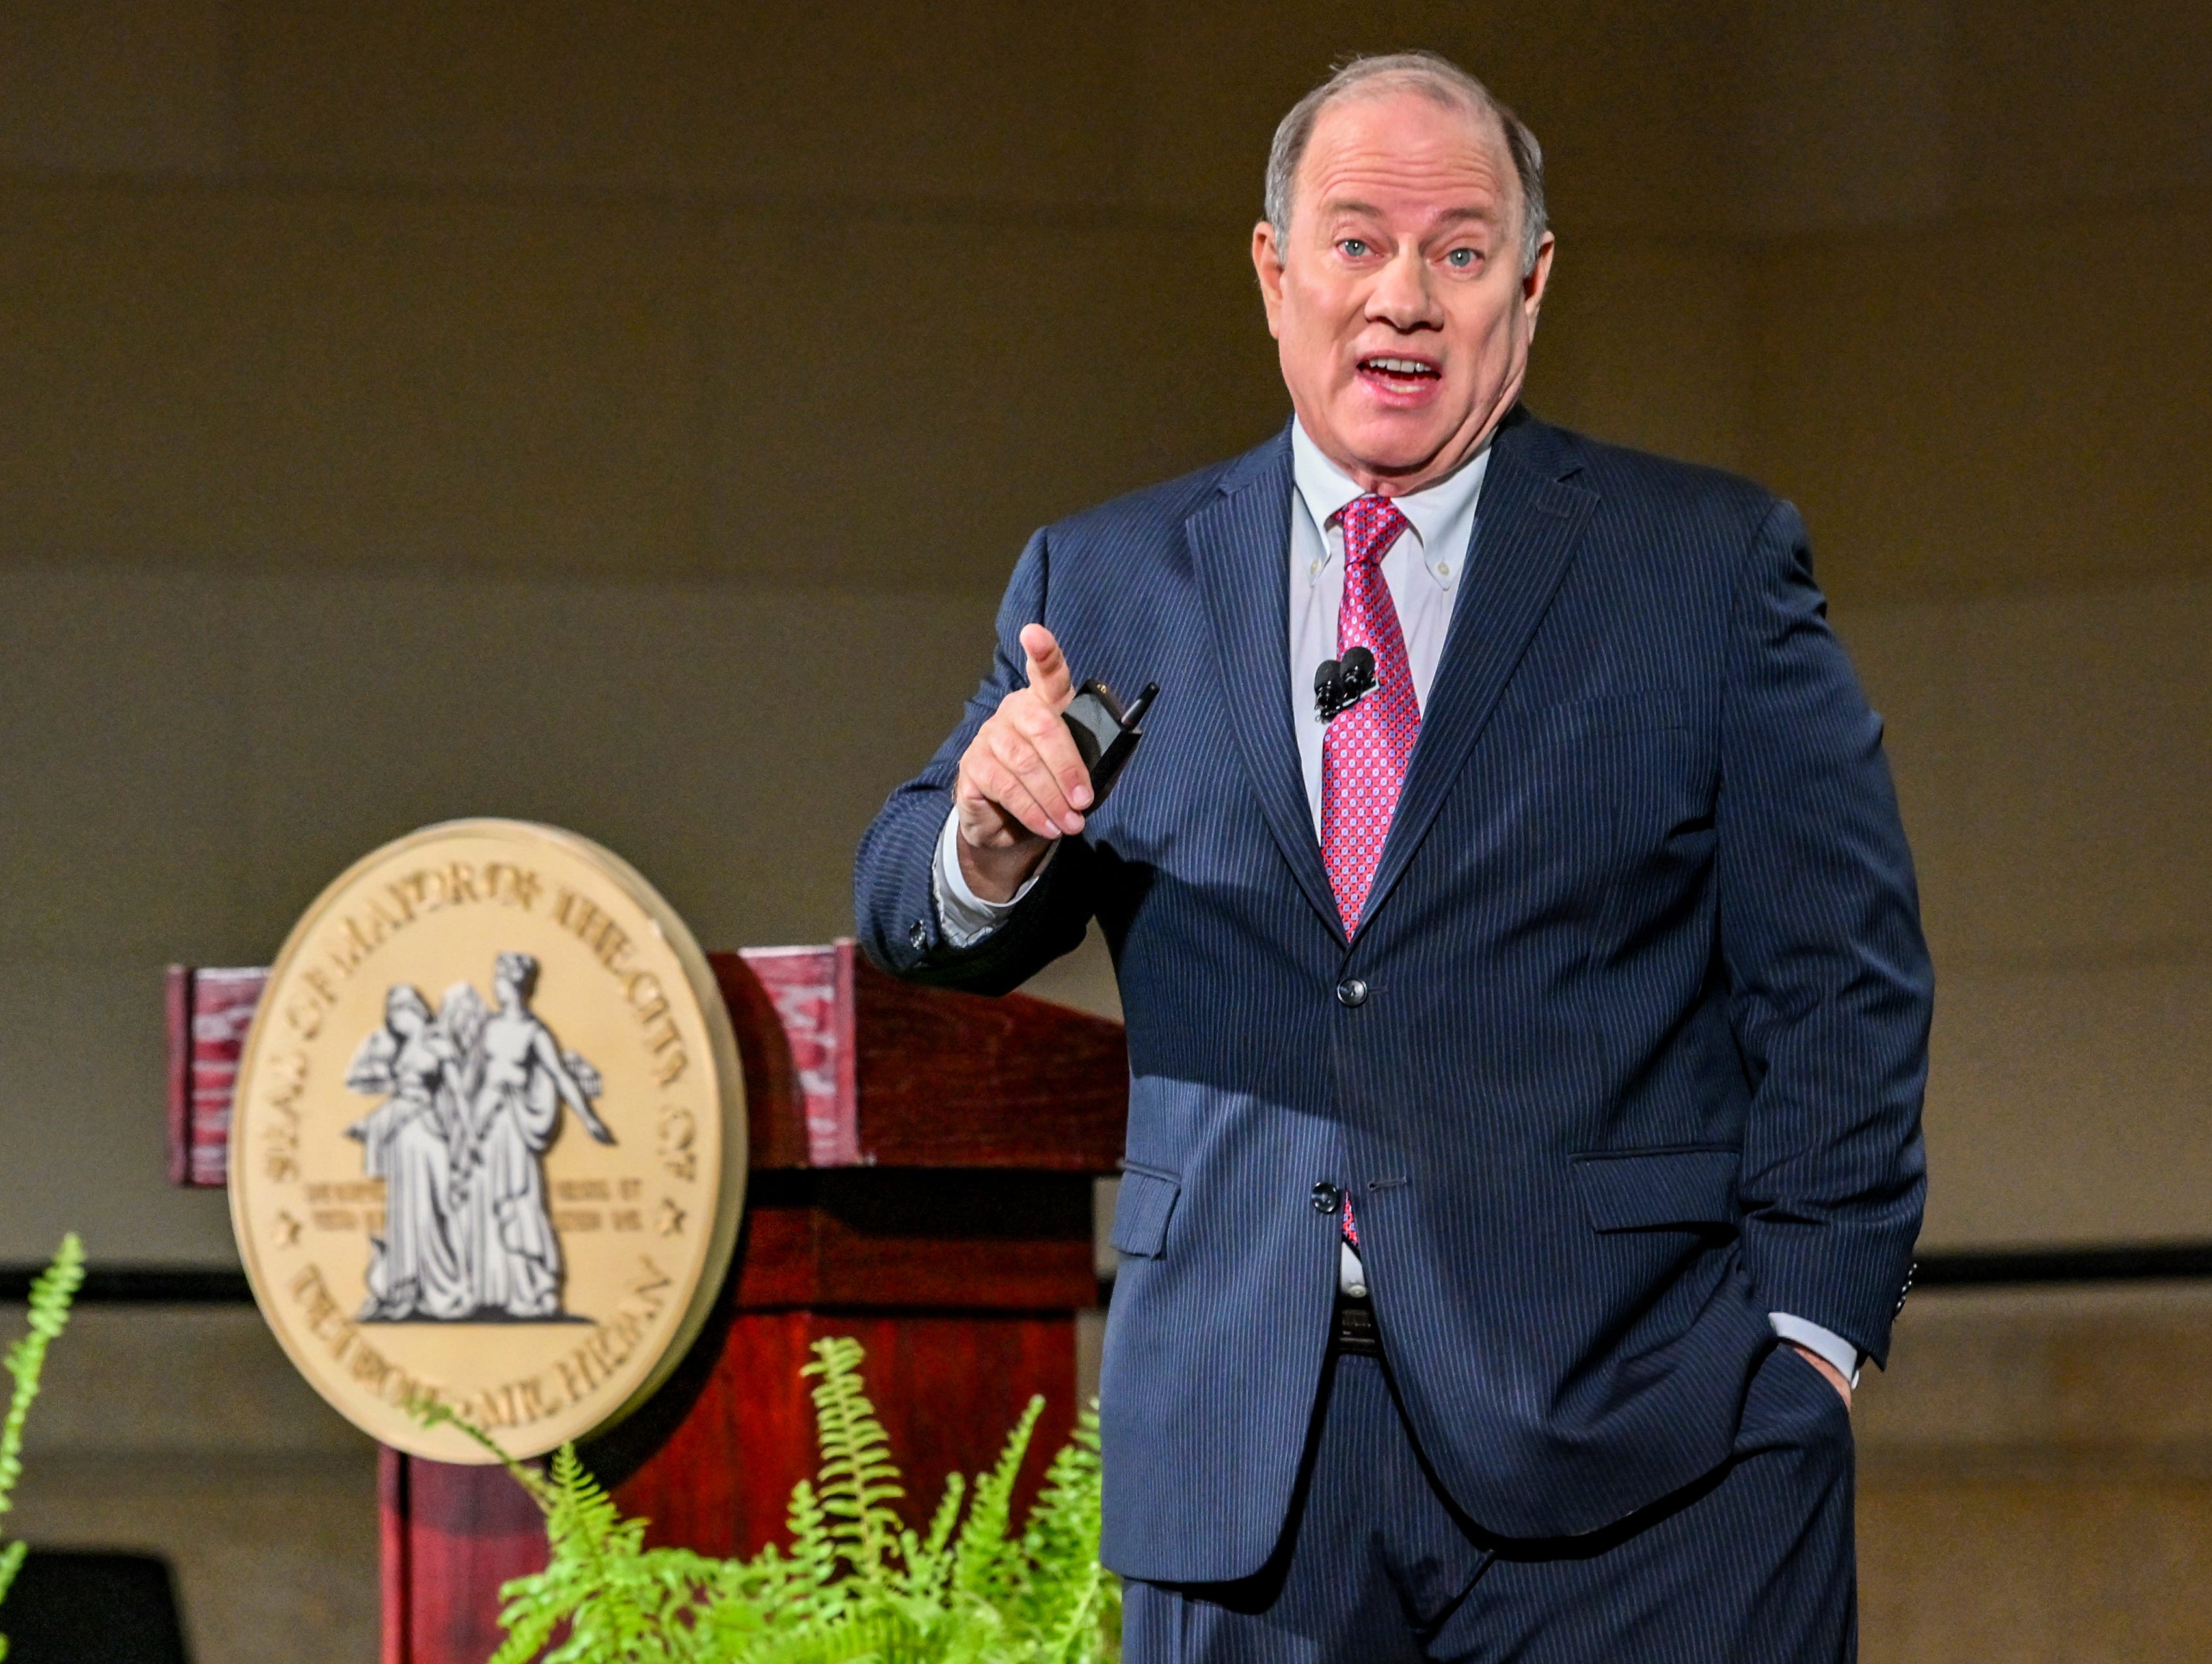 Duggan unveils his plan to reduce gun violence at 2023 State of the City speech